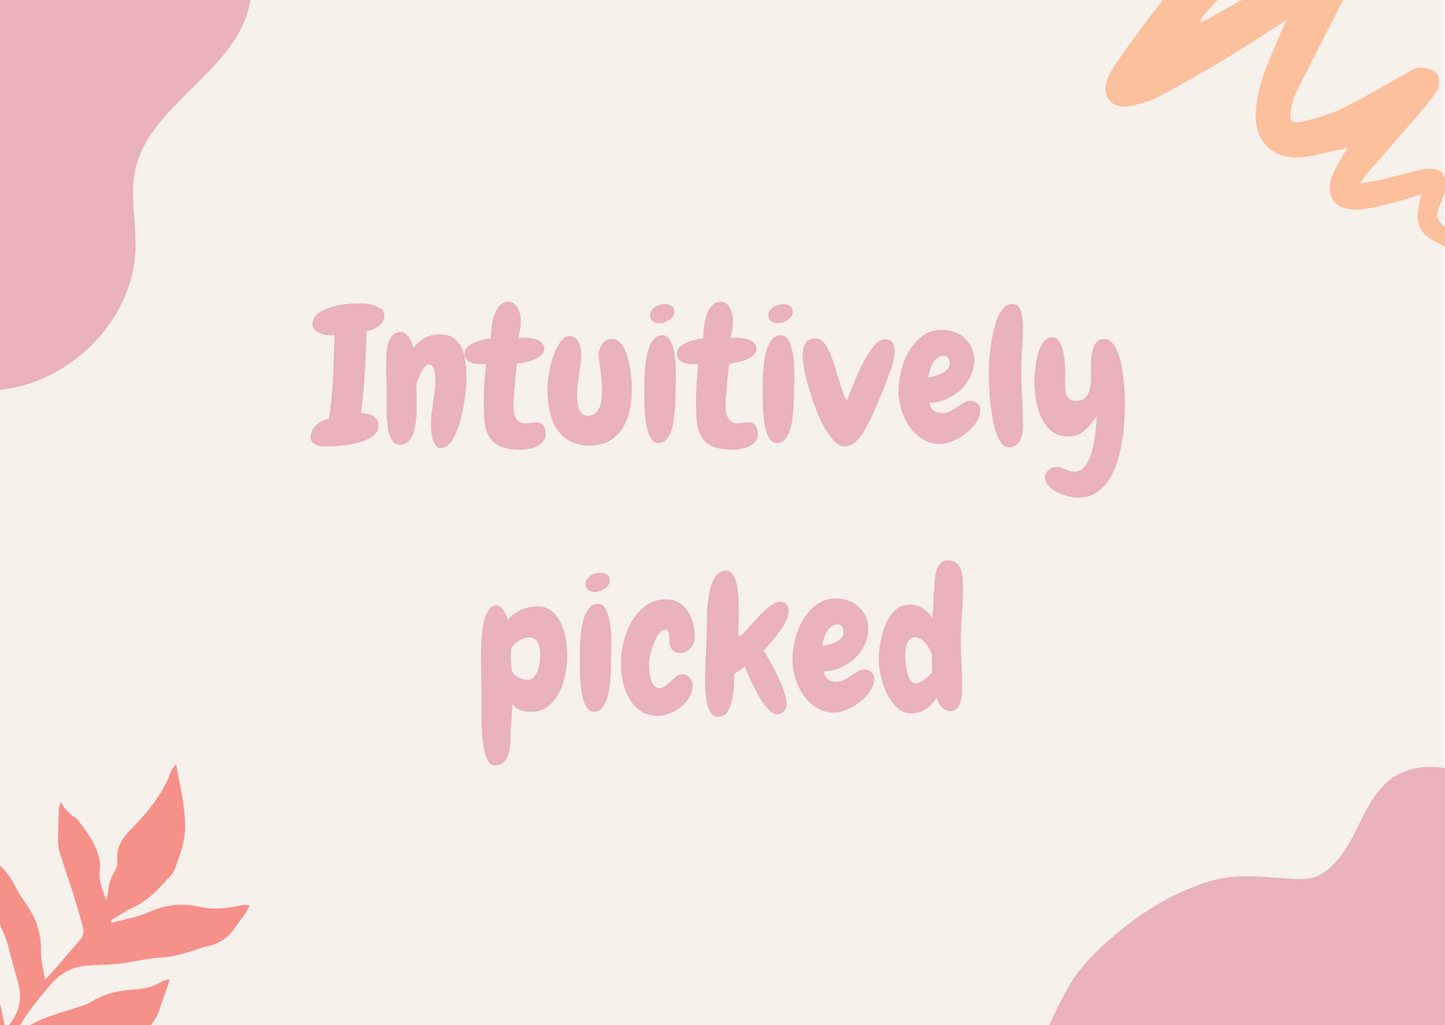 Intuitively picked crystal